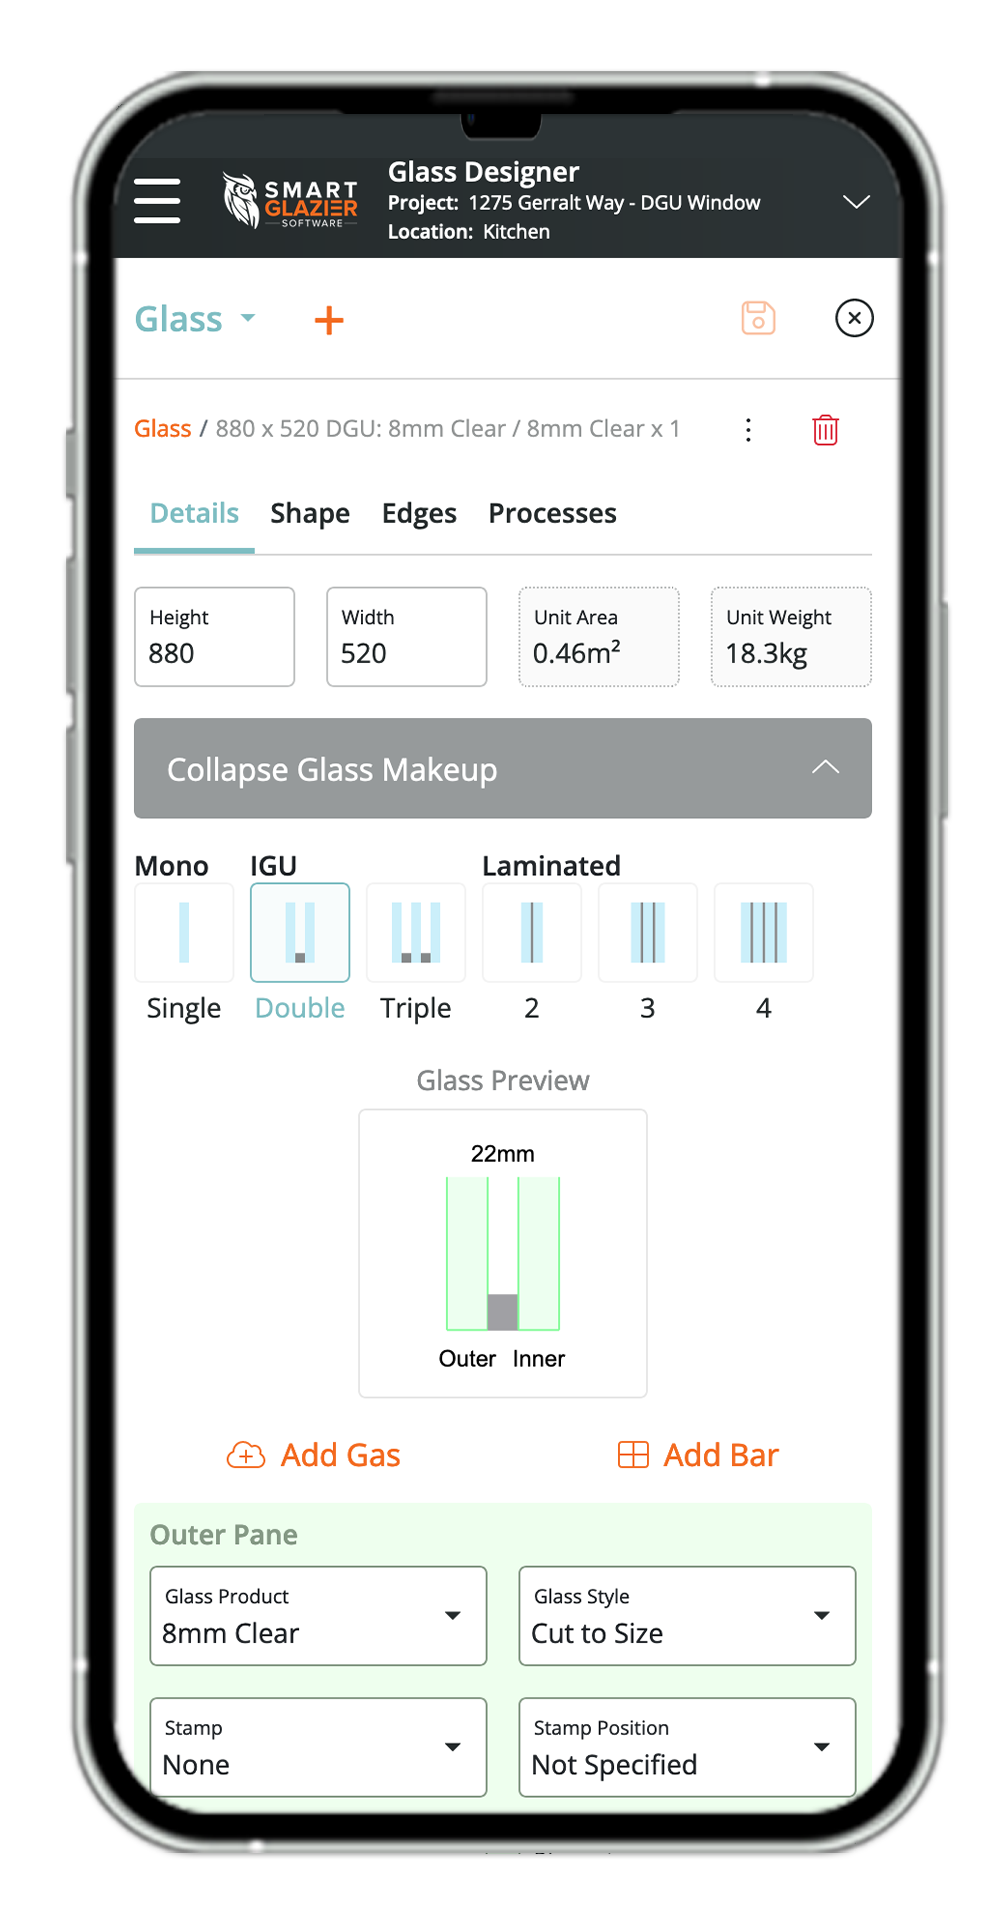 Smart Glass runs on your phone